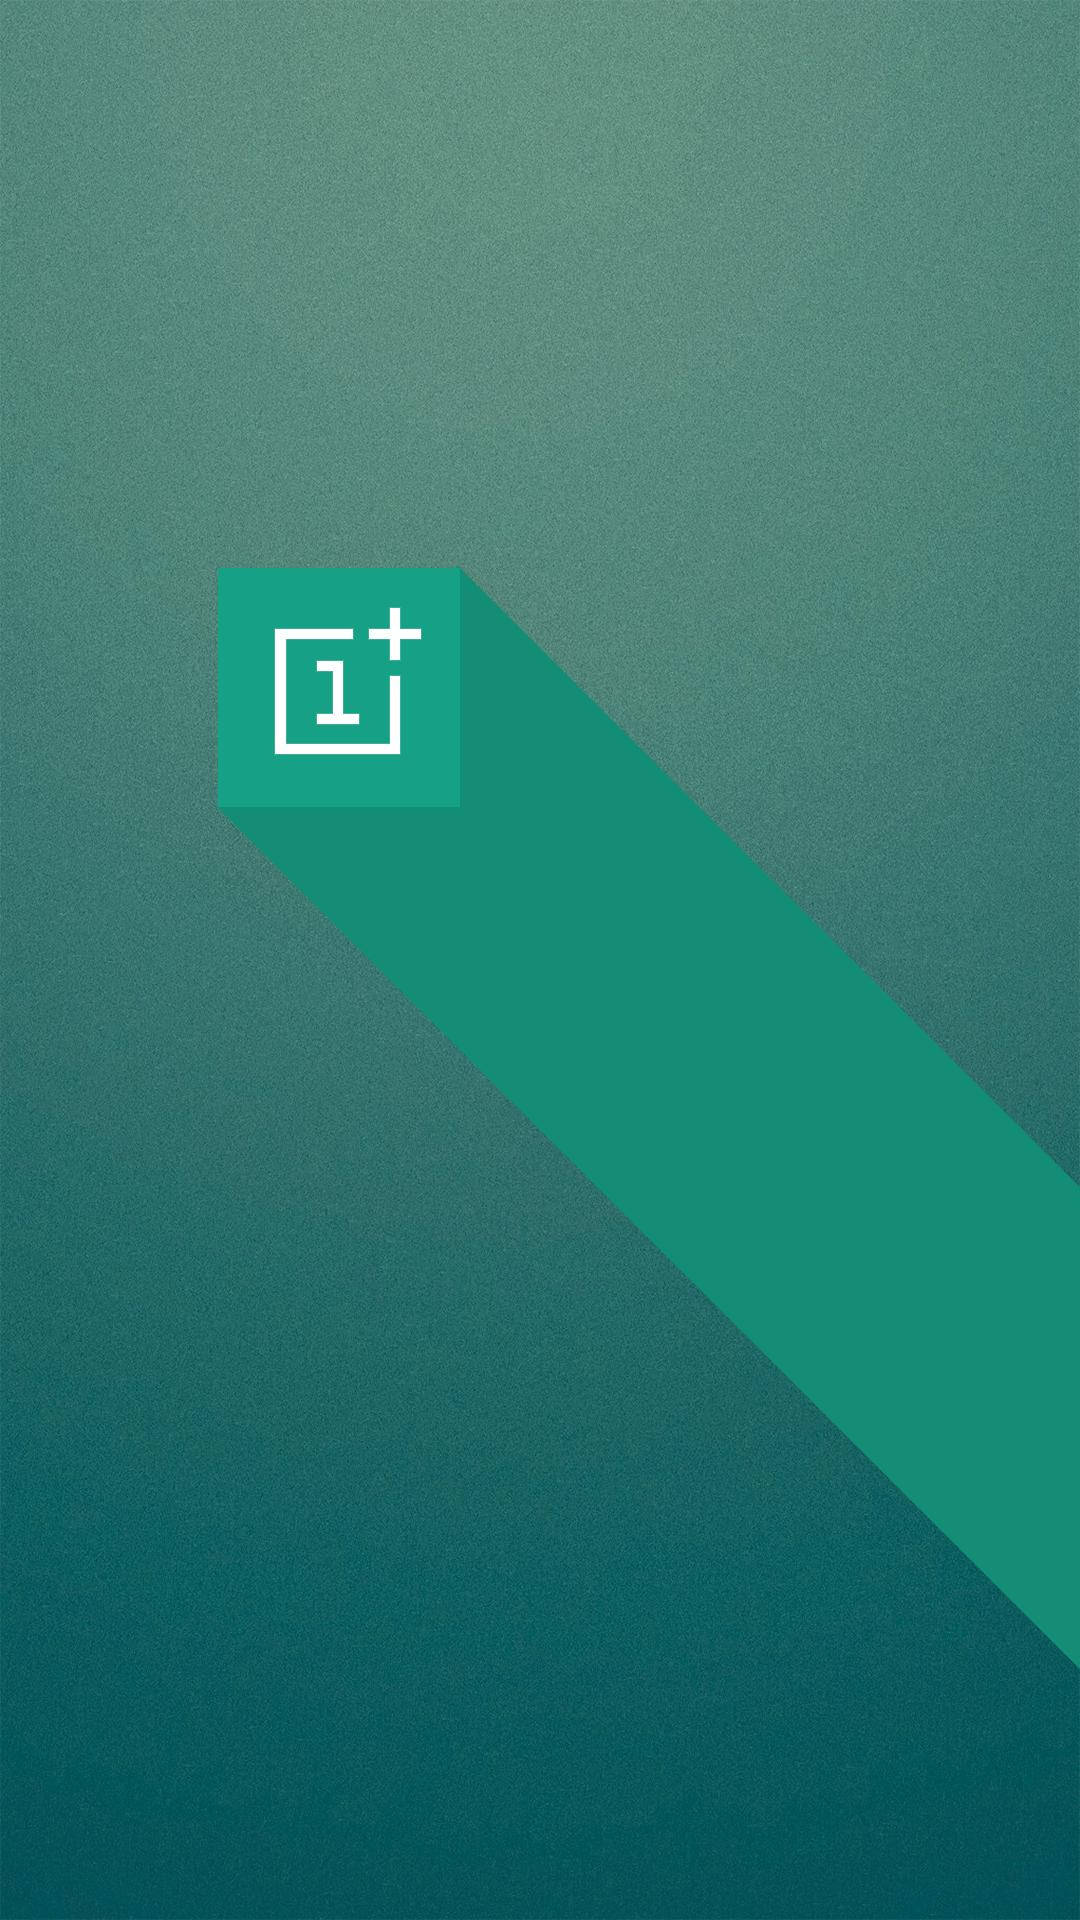 One Plus 5 Logo Wallpapers